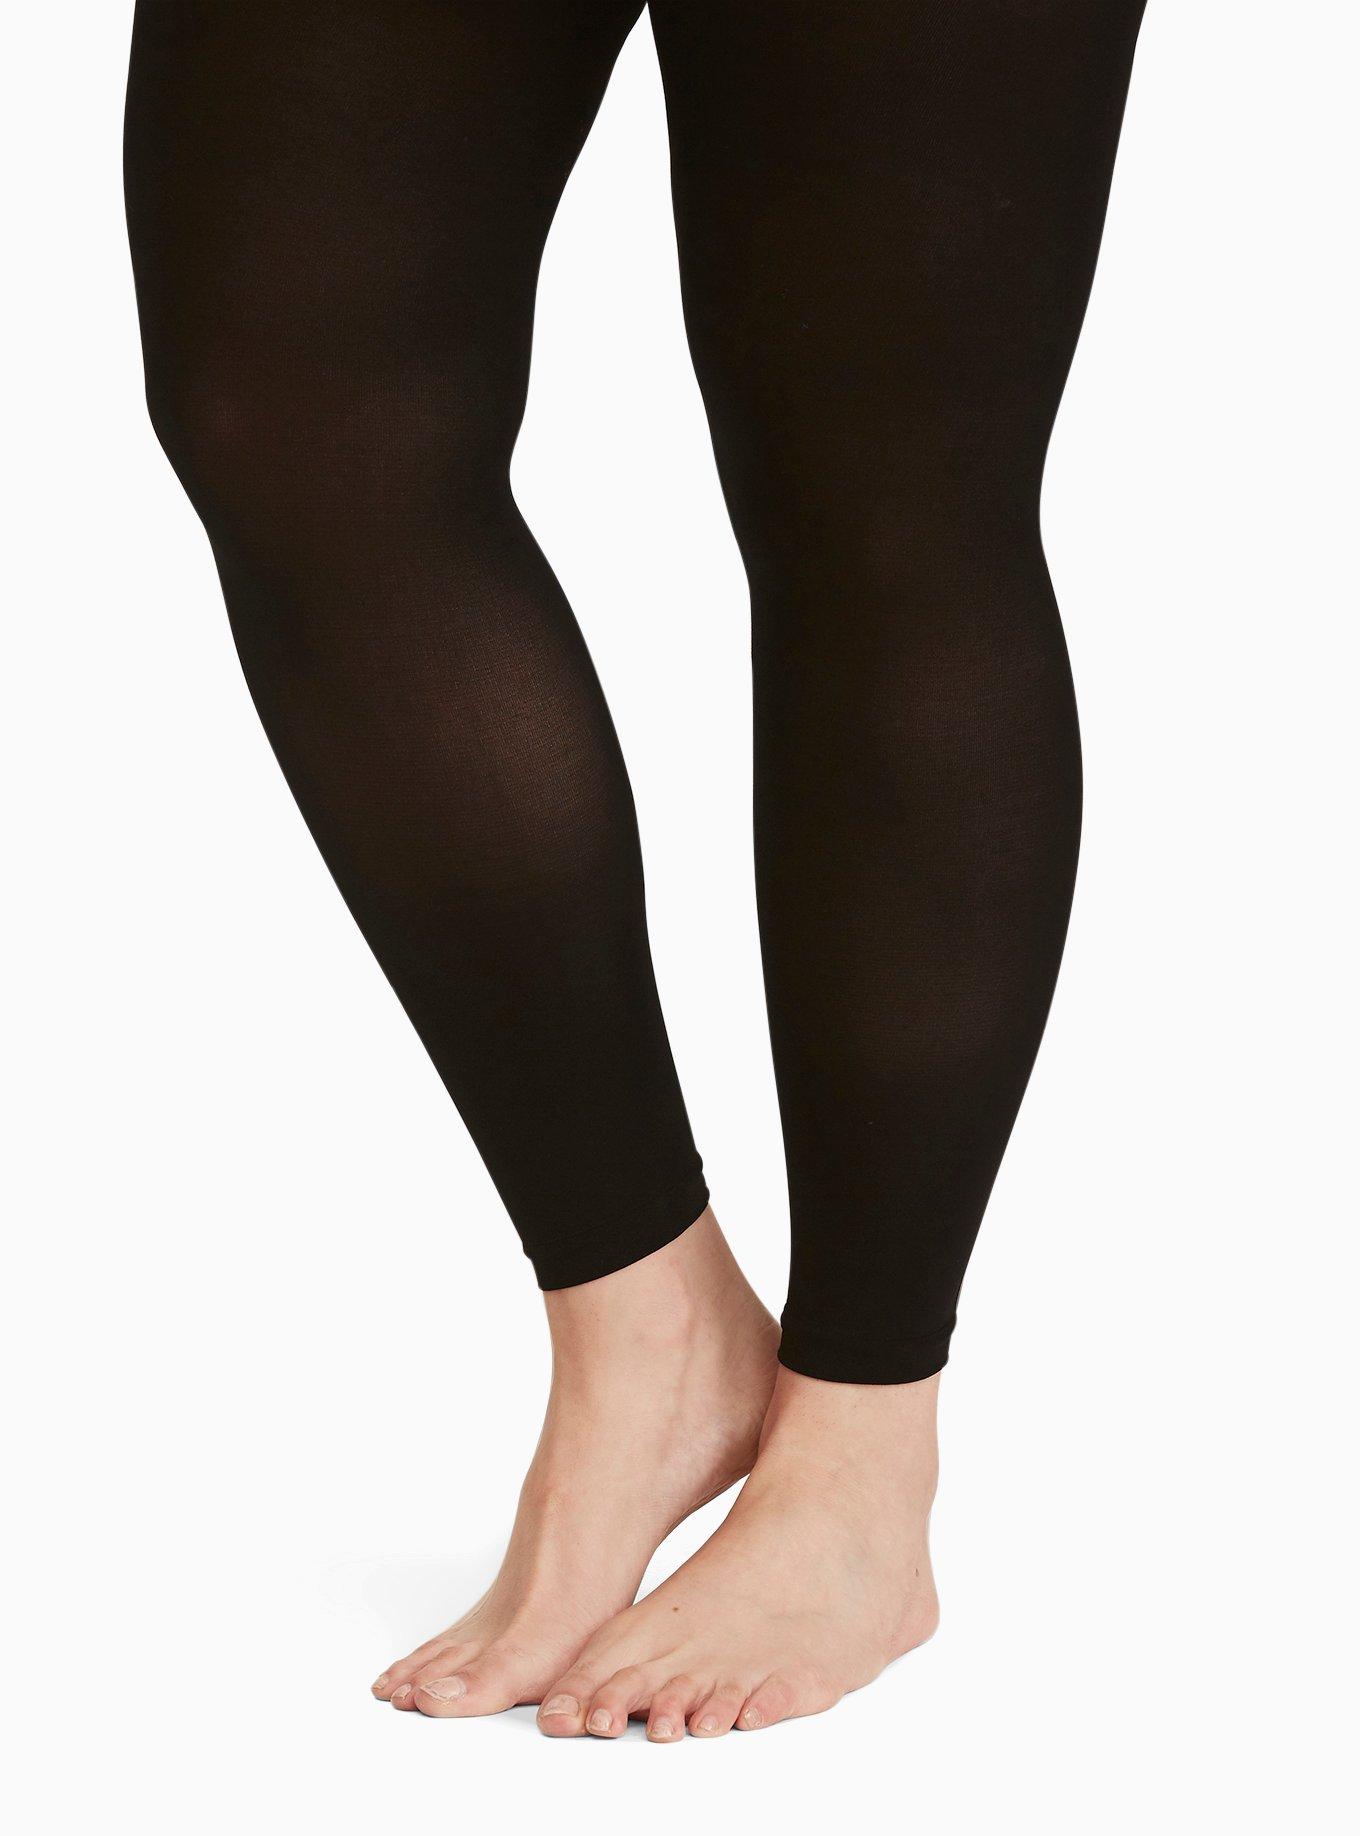 PLUS SIZE FOOTLESS TIGHTS, OPAQUE FOOTLESS TIGHTS